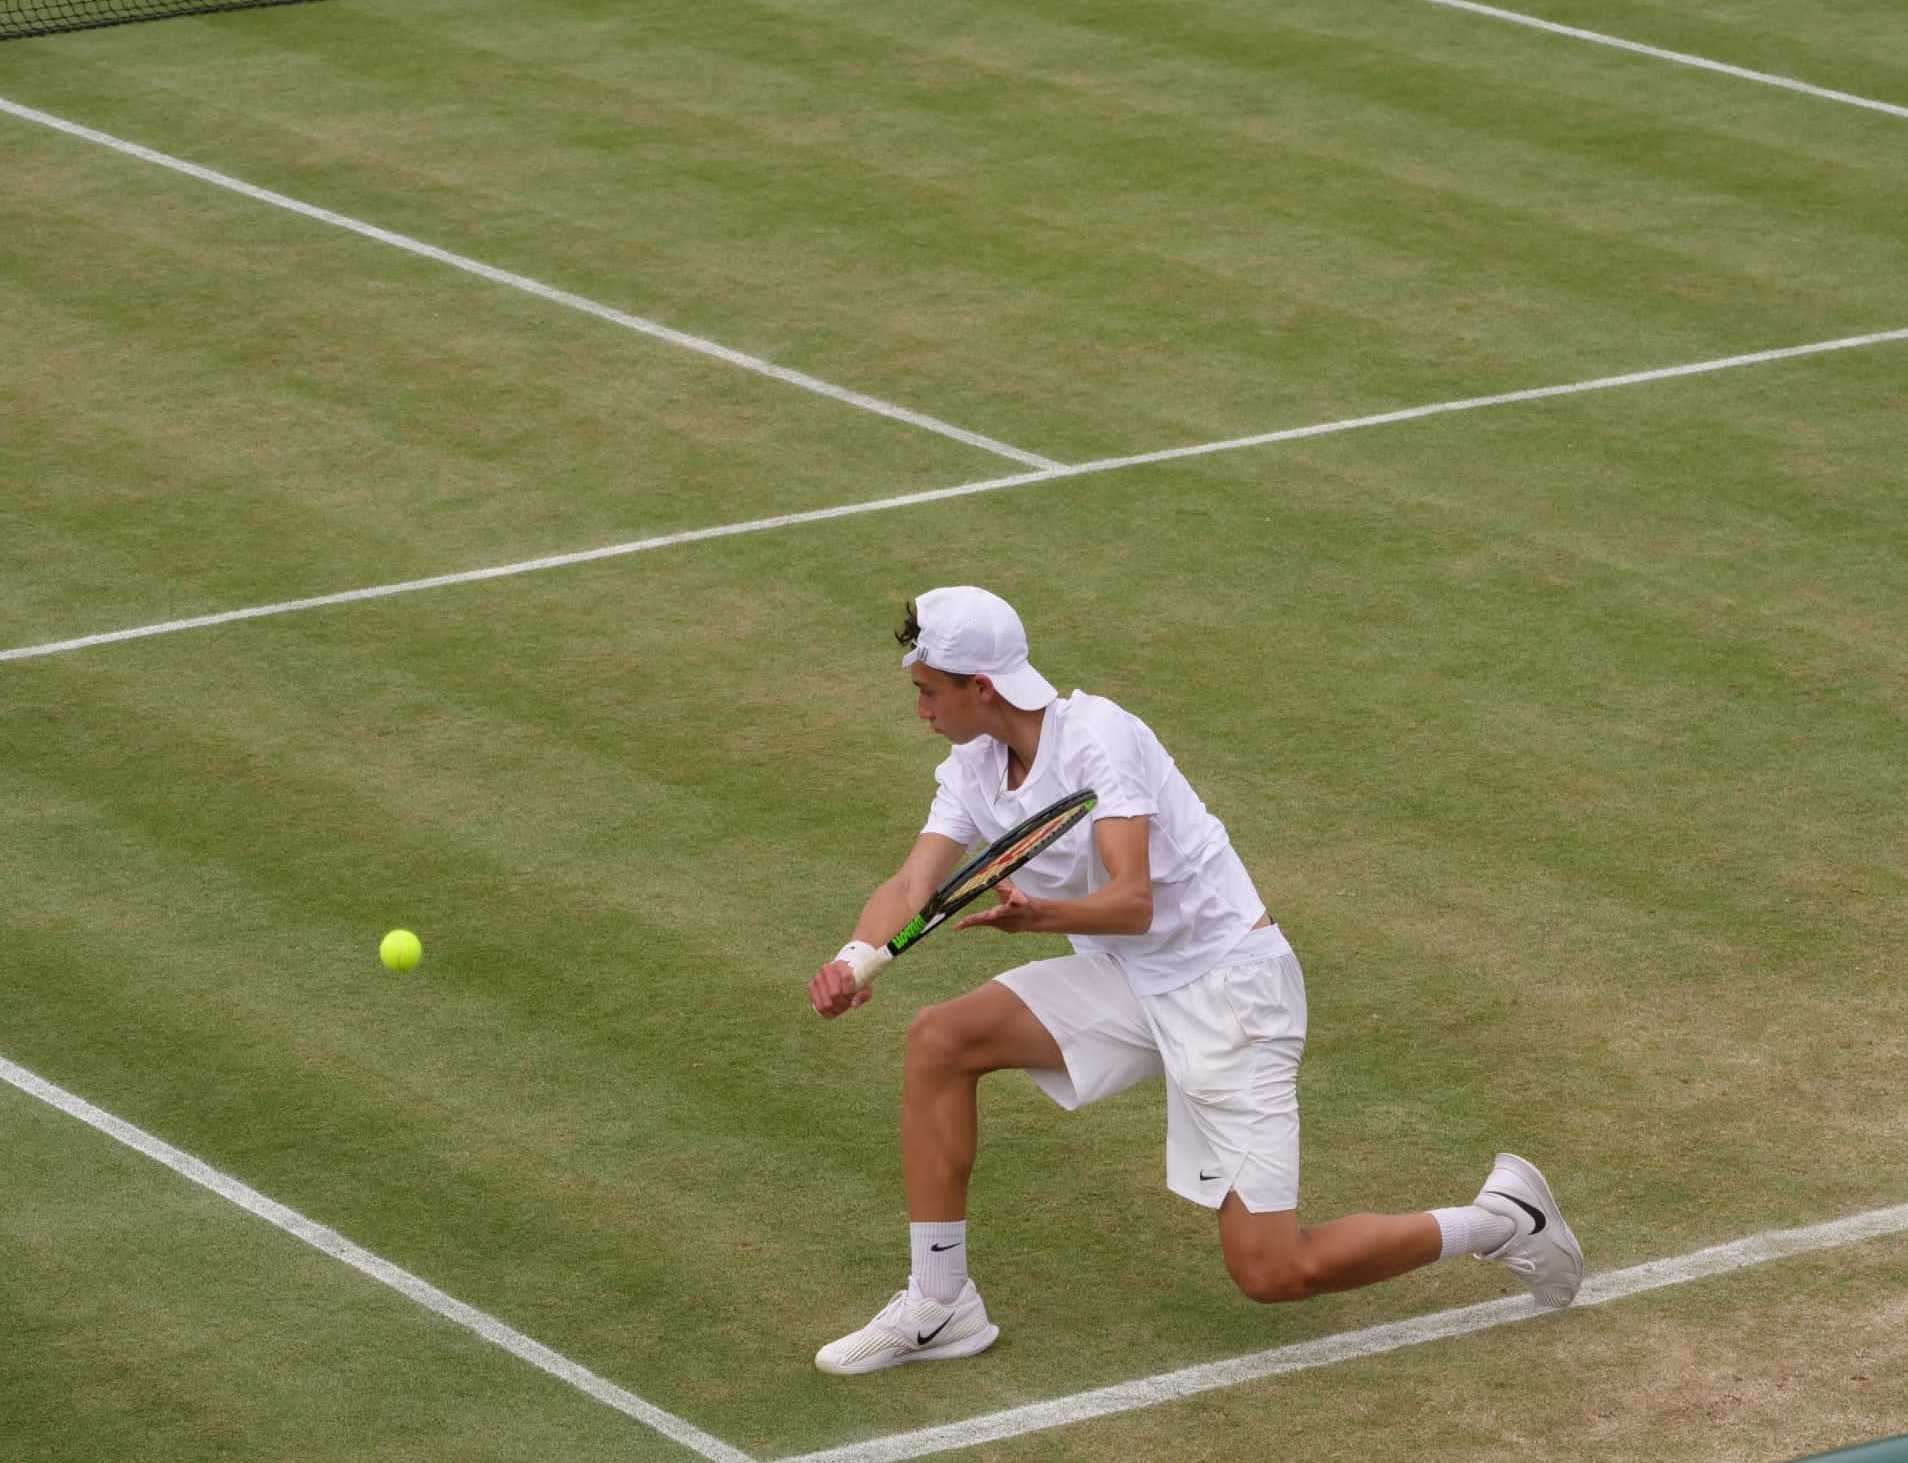 Patrick Brady made his debut at the Wimbledon Juniors earlier this month. Photo: Instagram/patrick_brady04